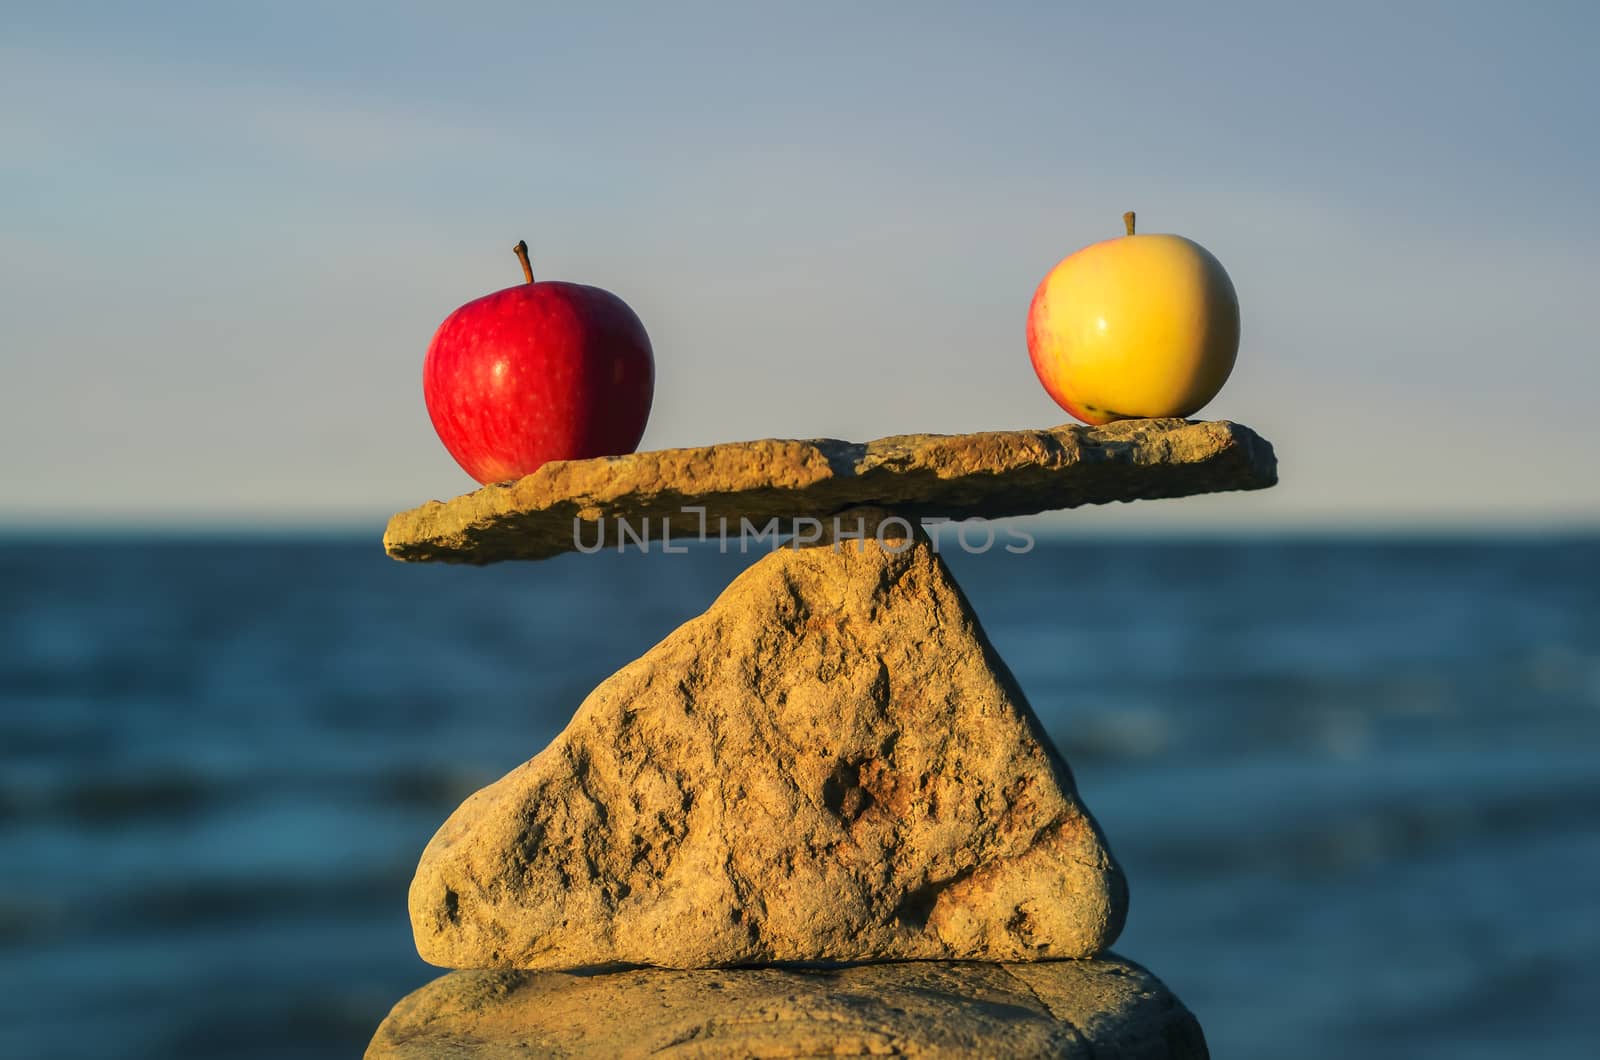 Balancing of apples by styf22